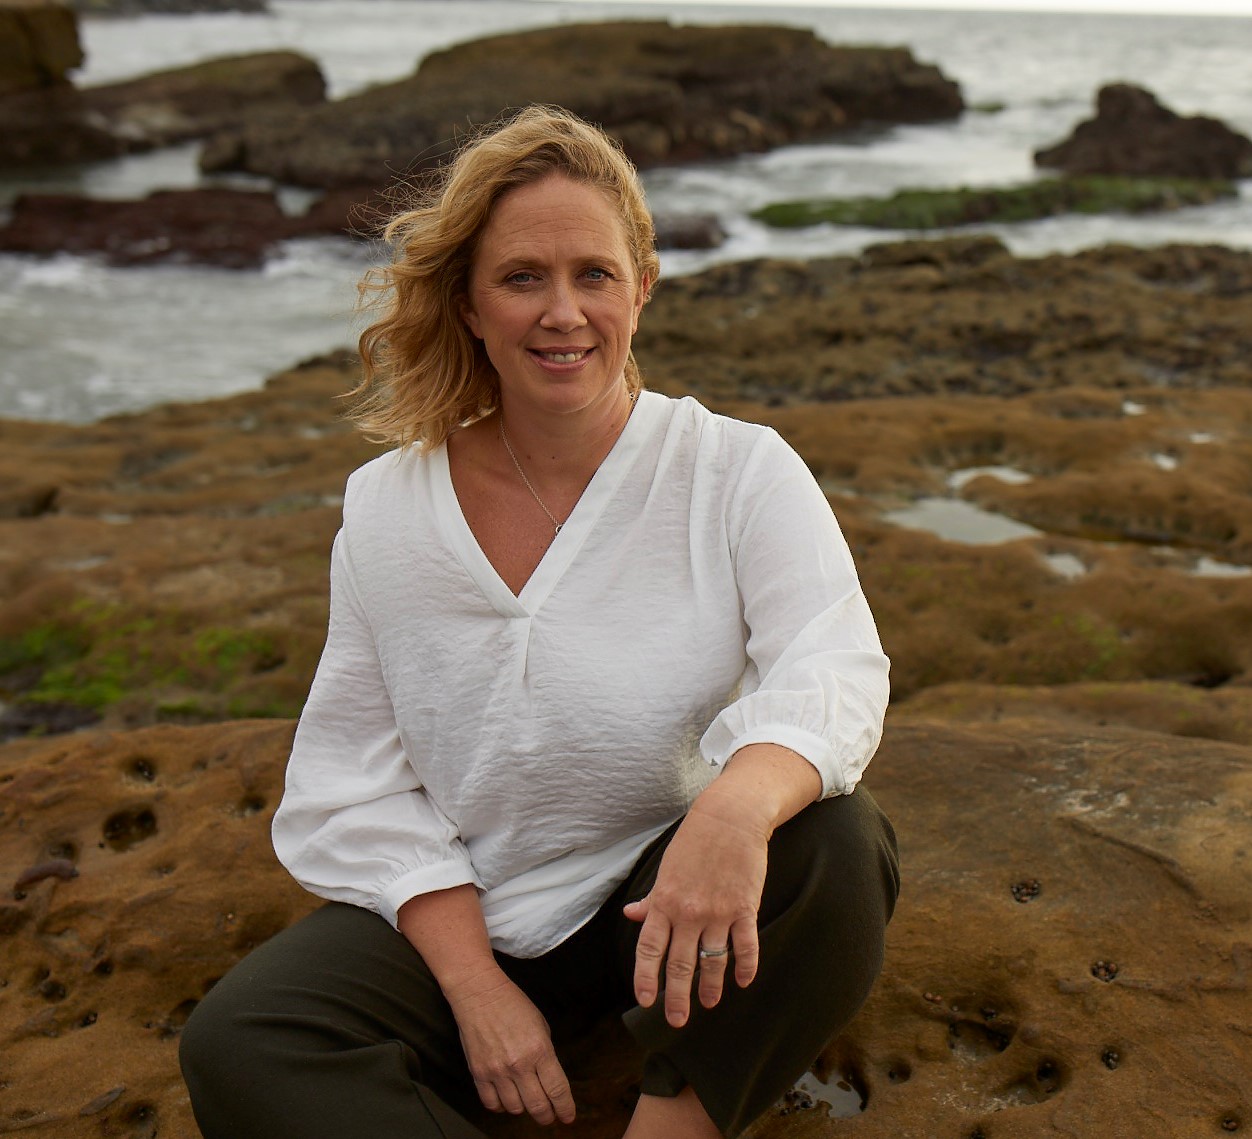 Centered in the image is a woman wearing a white linen shirt and dark pants. She is sitting on a rock, her knees tucked up as if she is in a crouching position. She has blonde hair which is blowing slightly with the breeze to the left of the image. The rock she is sitting on is brown colored and has small craters in it. The rocky landscape extends behind her where it then reaches the ocean, which is a light cray color. There are rocks extending from the ocean as well.